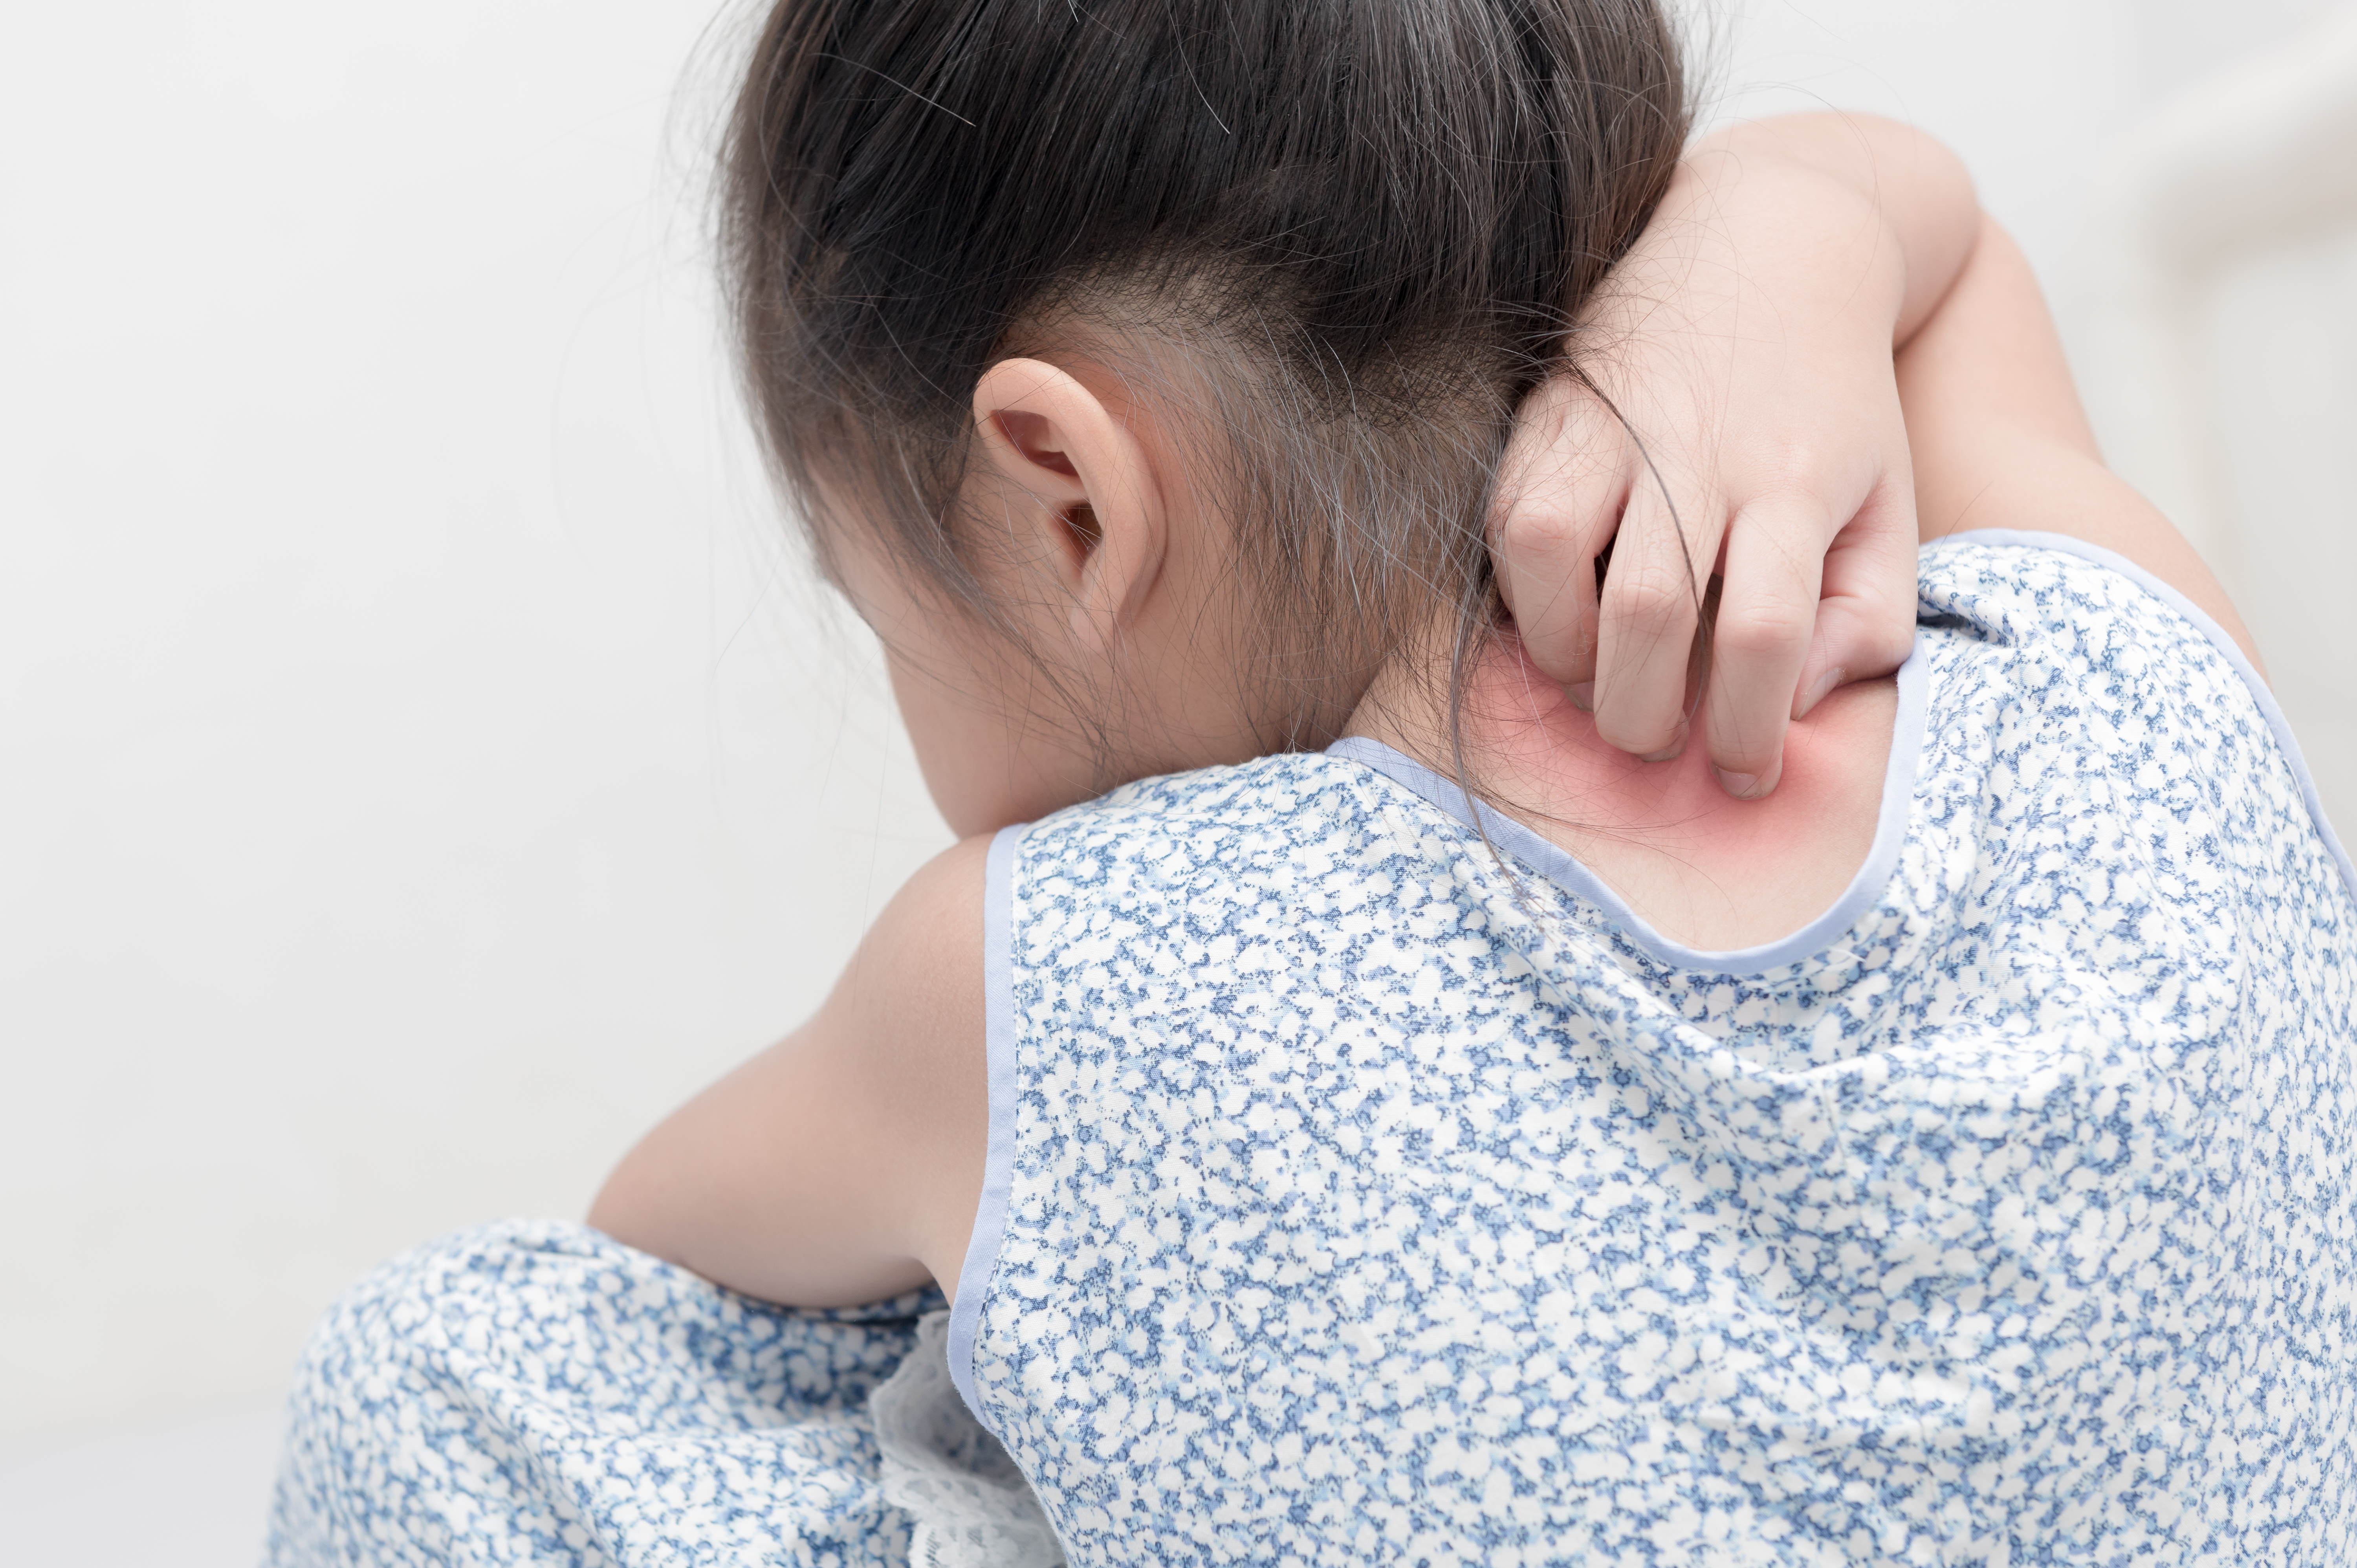 Child scratching the back of her neck: potential heat rash symptoms